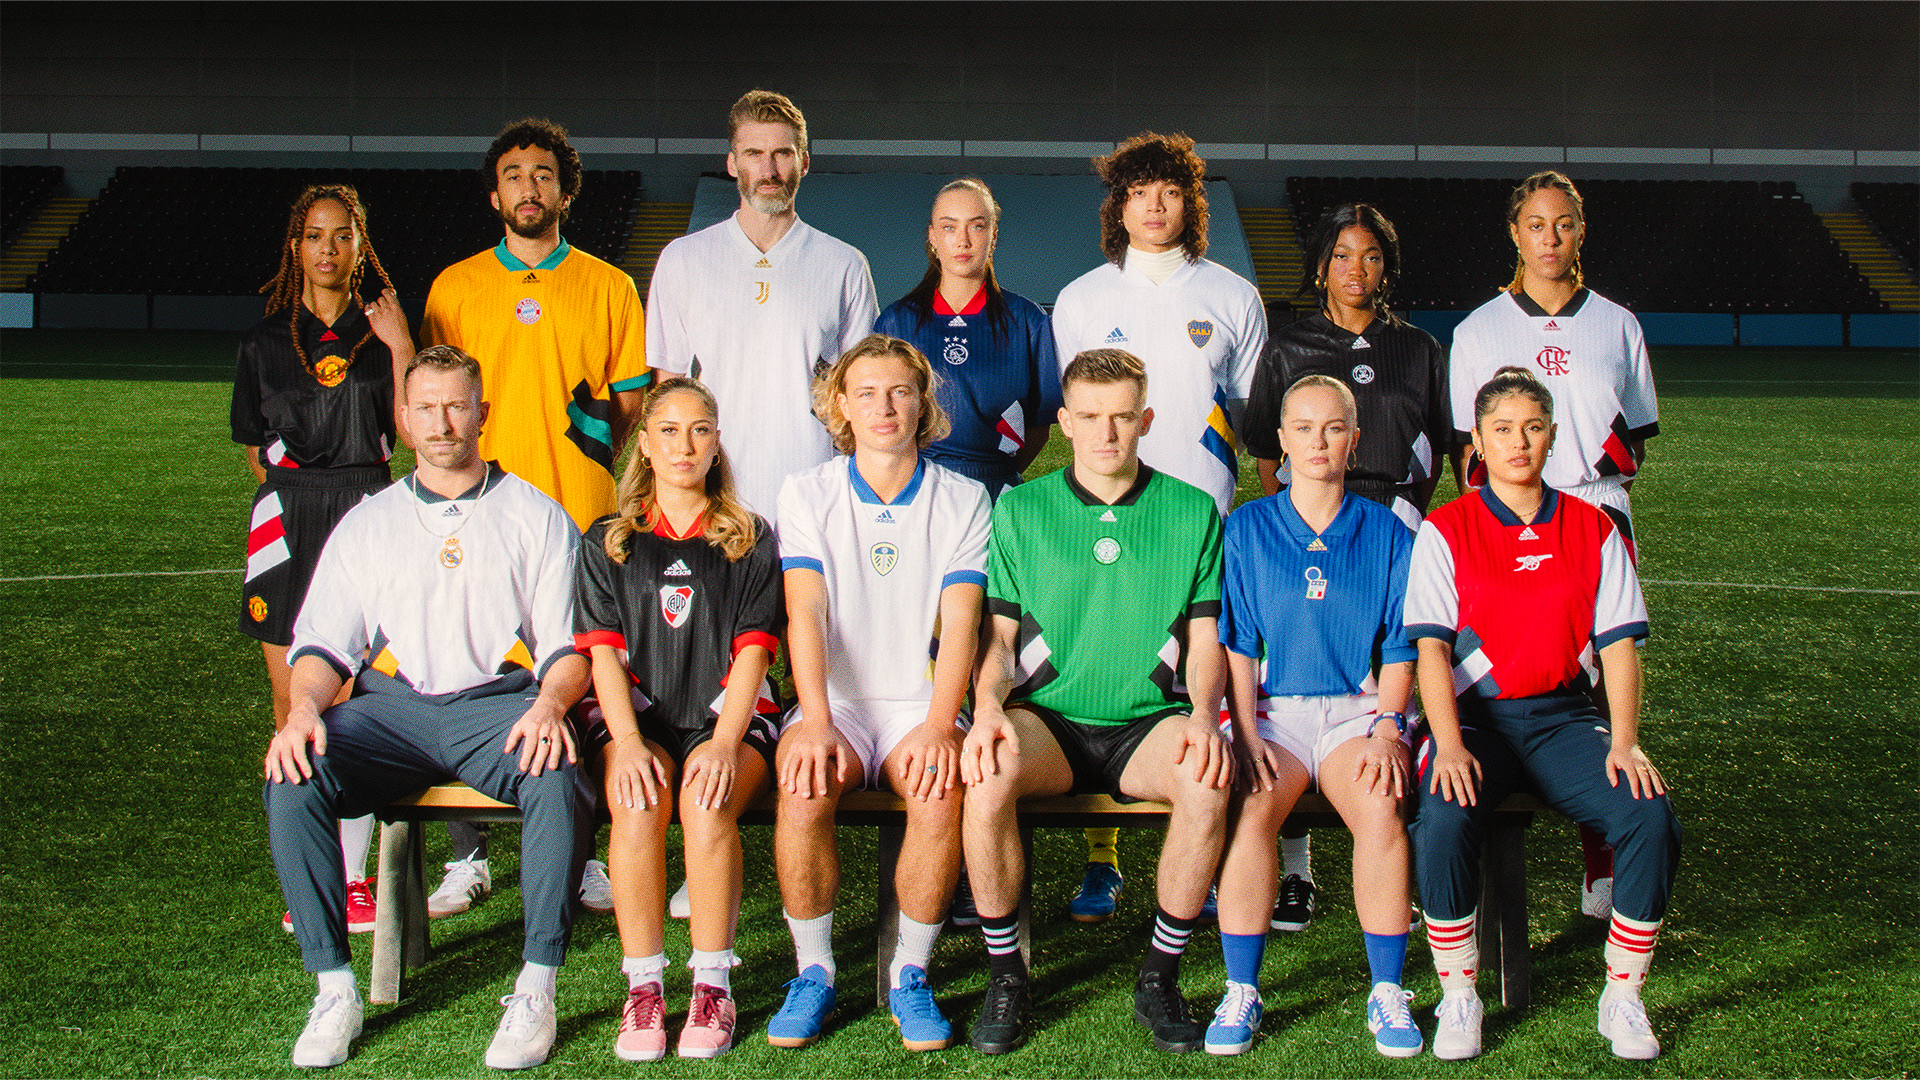 Ecología dos semanas Helecho adidas bring back '90s football nostalgia with its latest icons collection  | Goal.com US